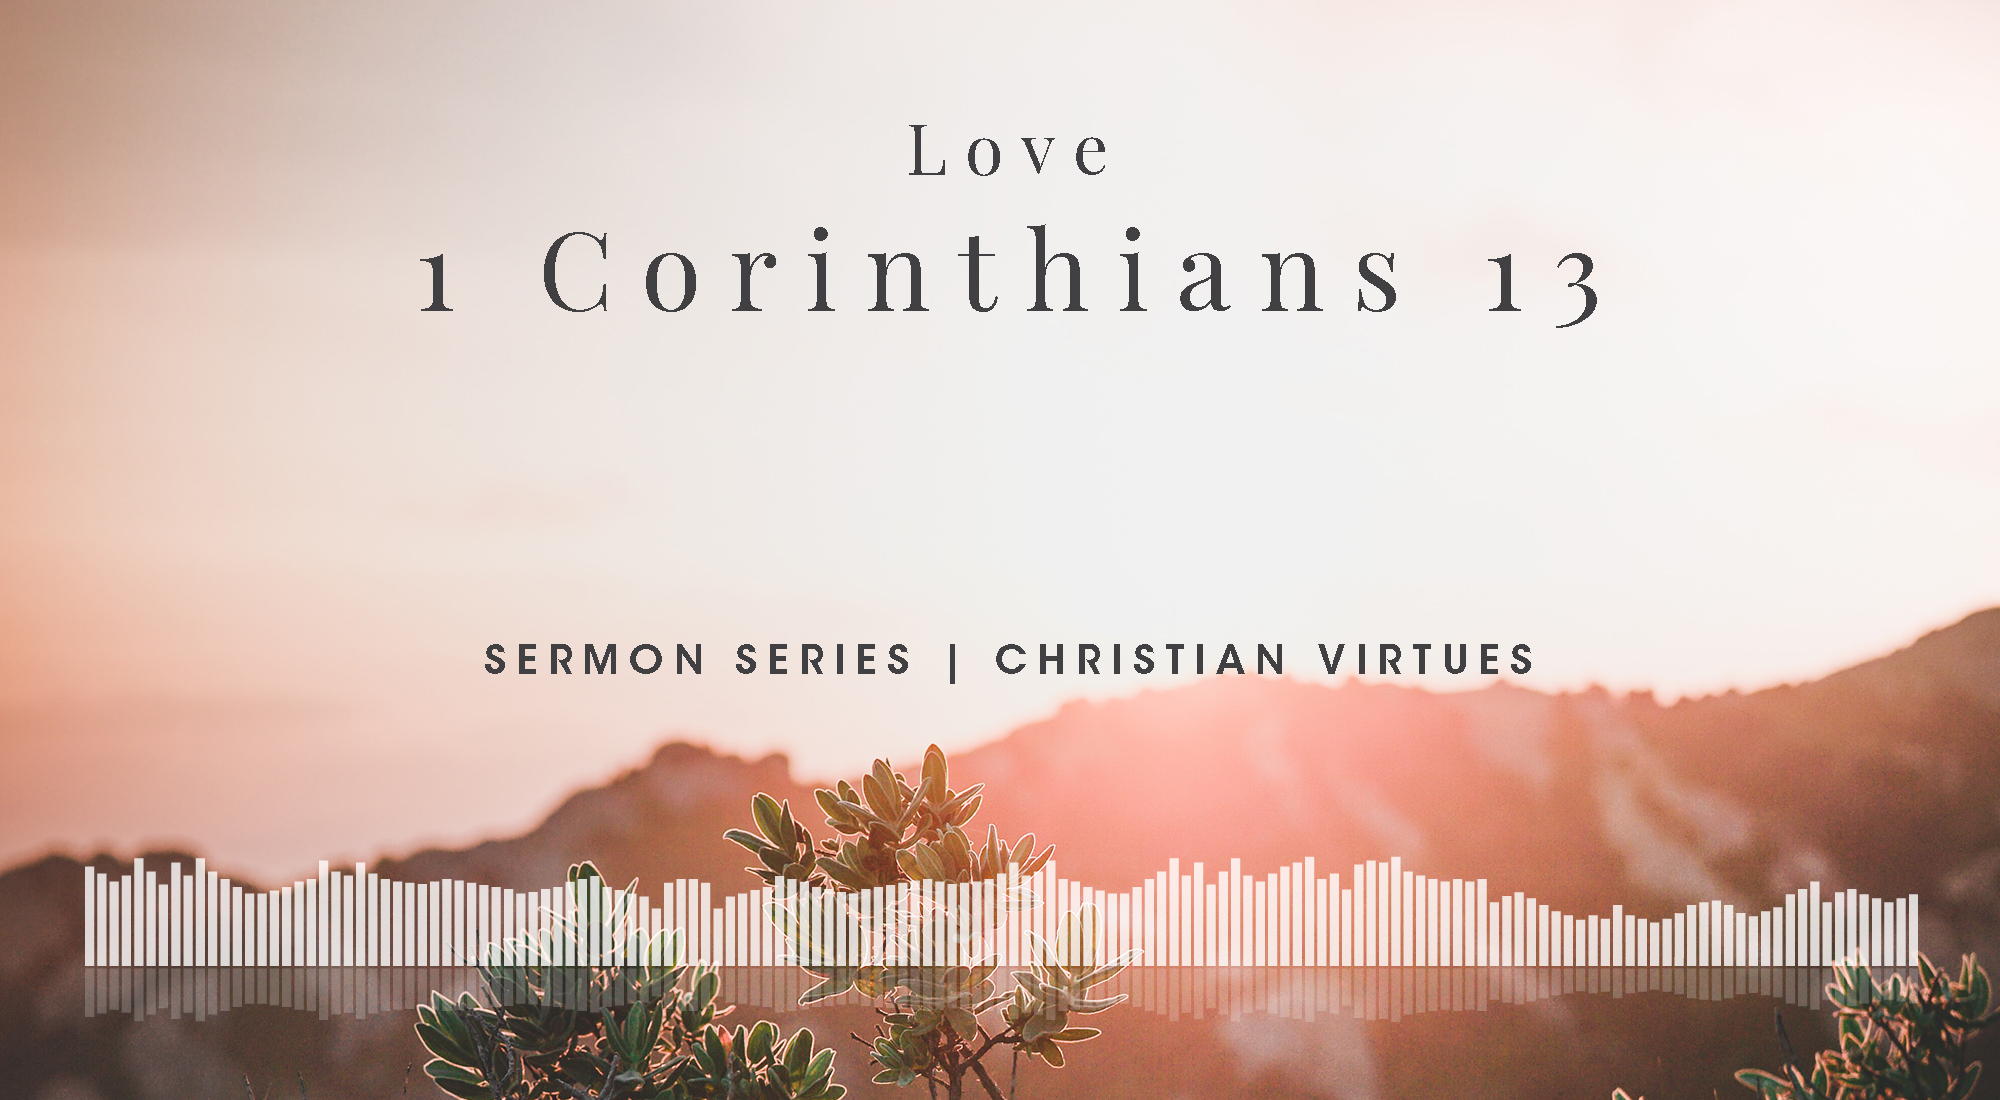 We wrap up our Christian Virtues series by exploring the greatest of the big three: love. We learn that we must be selfless, grow up, and invest in eternal things. This is simple in concept, but difficult in execution.